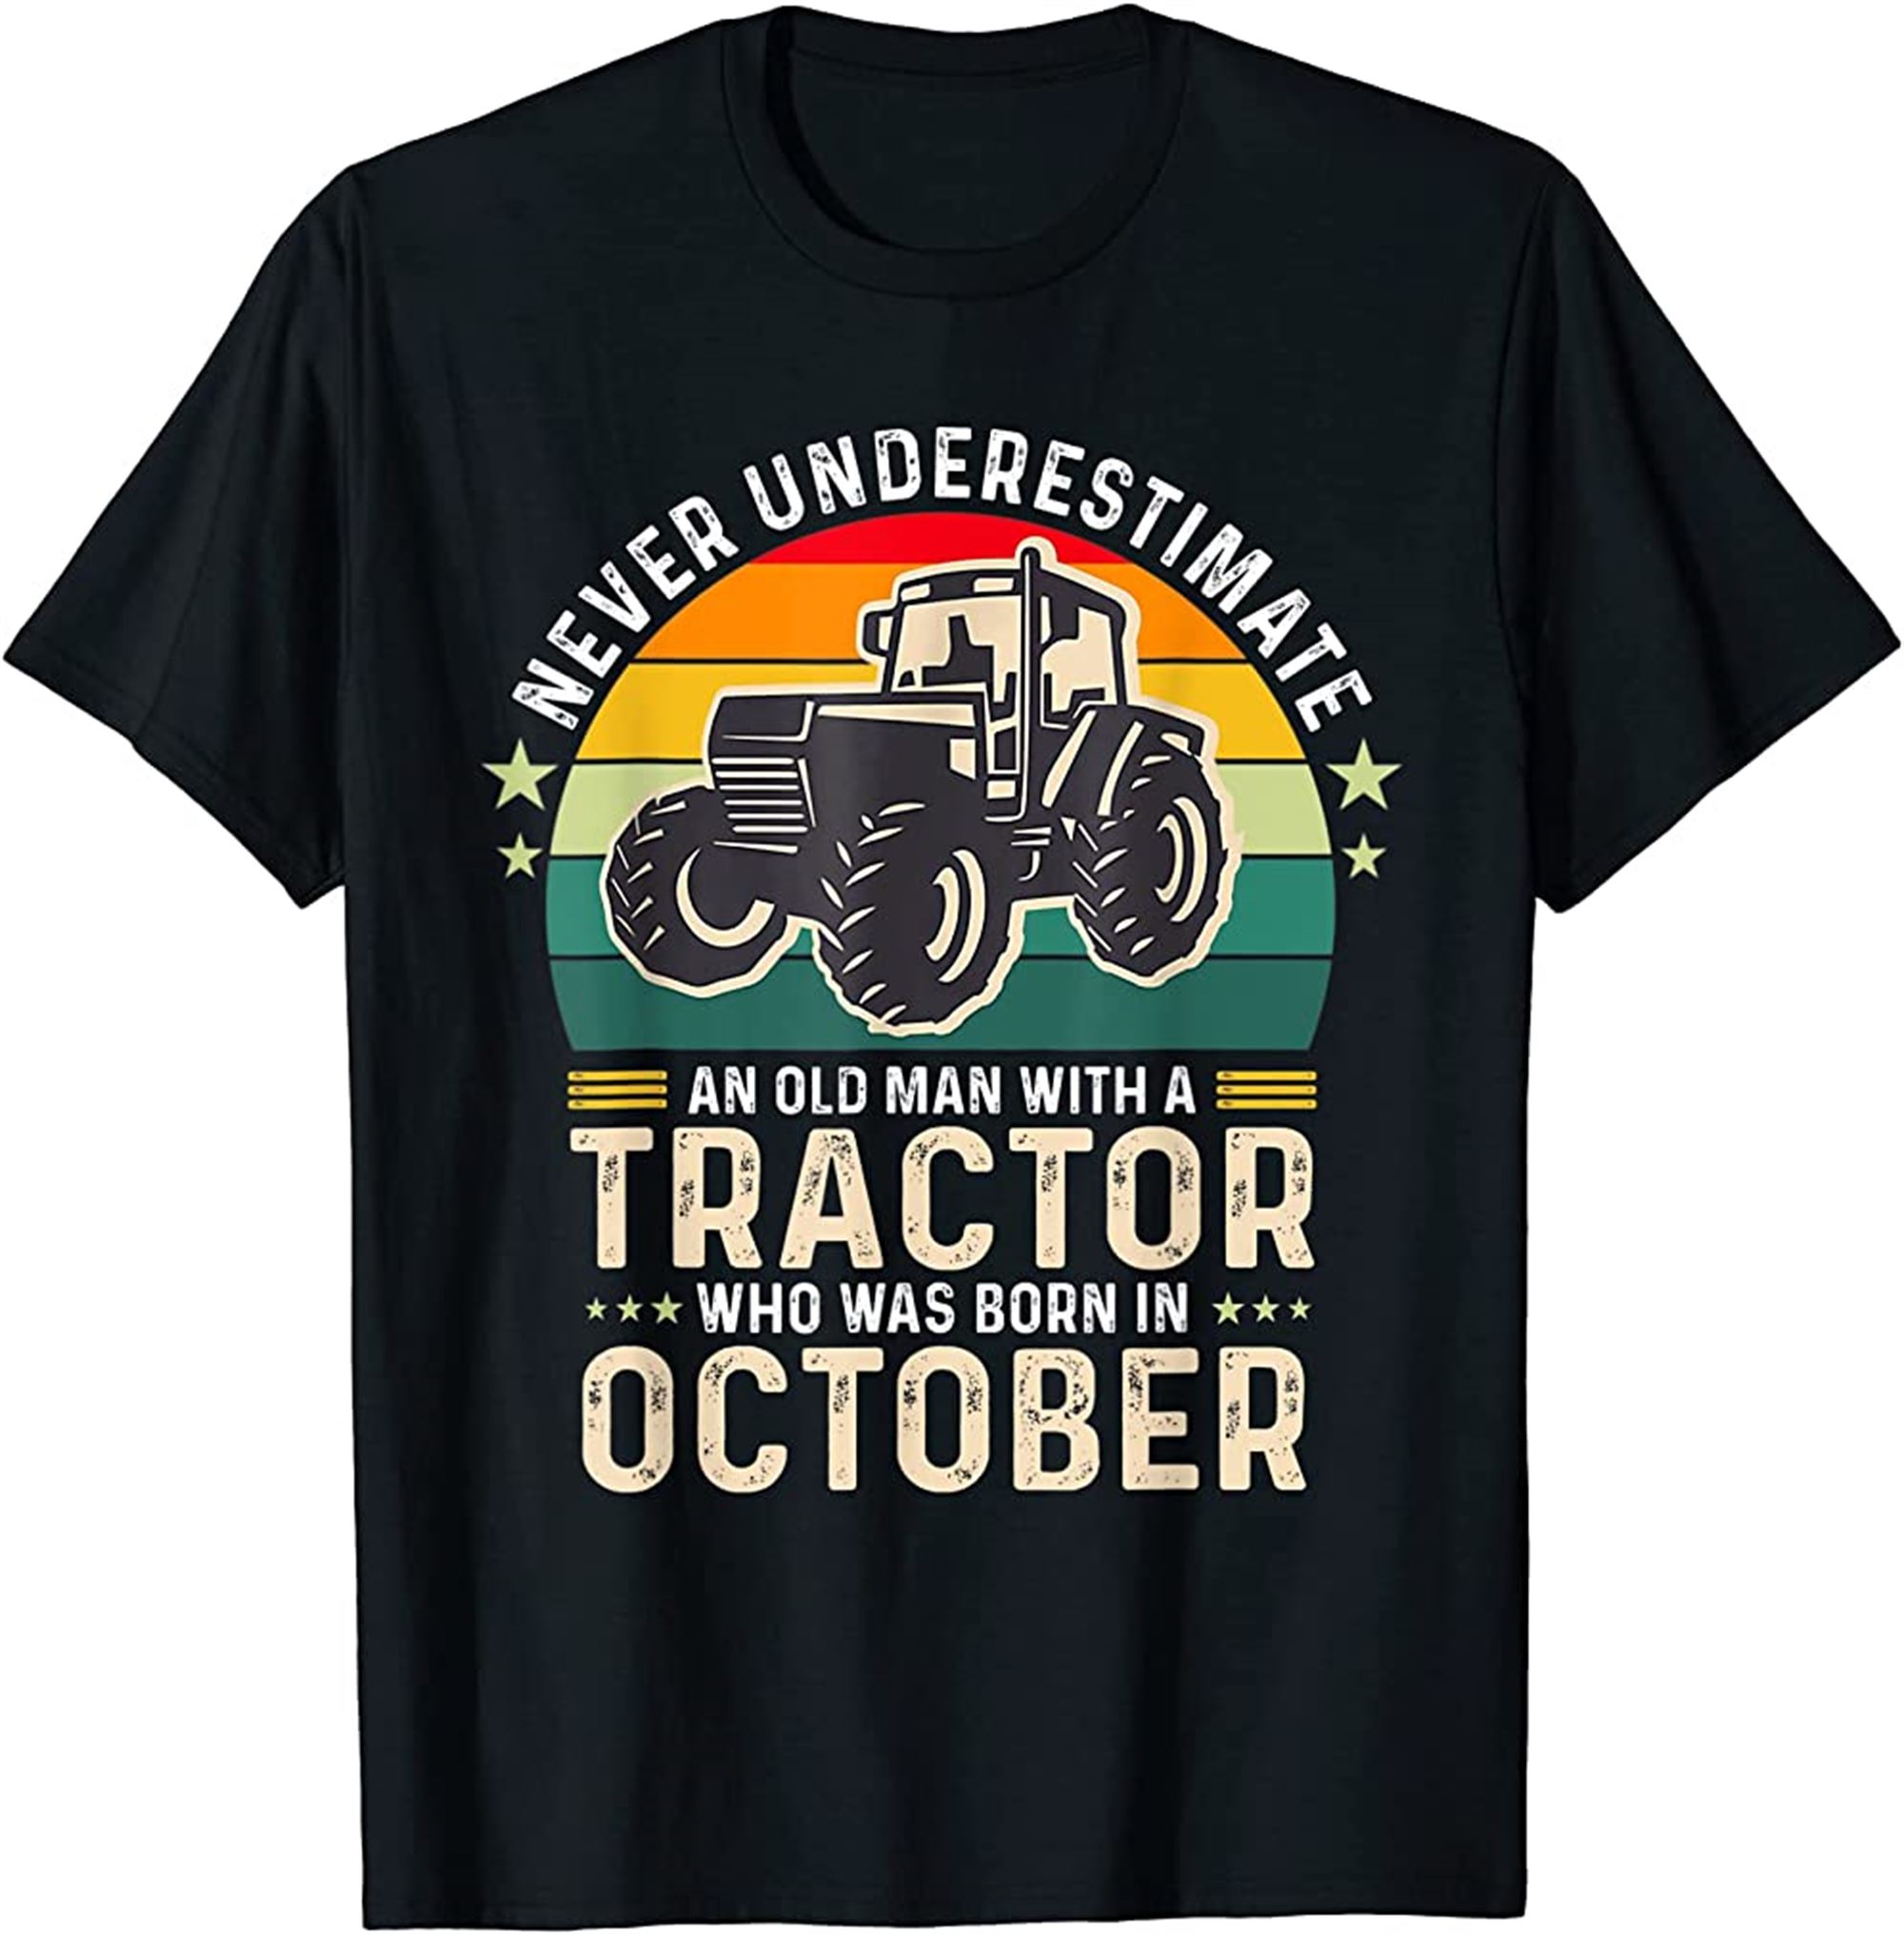 Mens Never Underestimate Old Man With Tractor Born In October T-shirt Size Up To 5xl